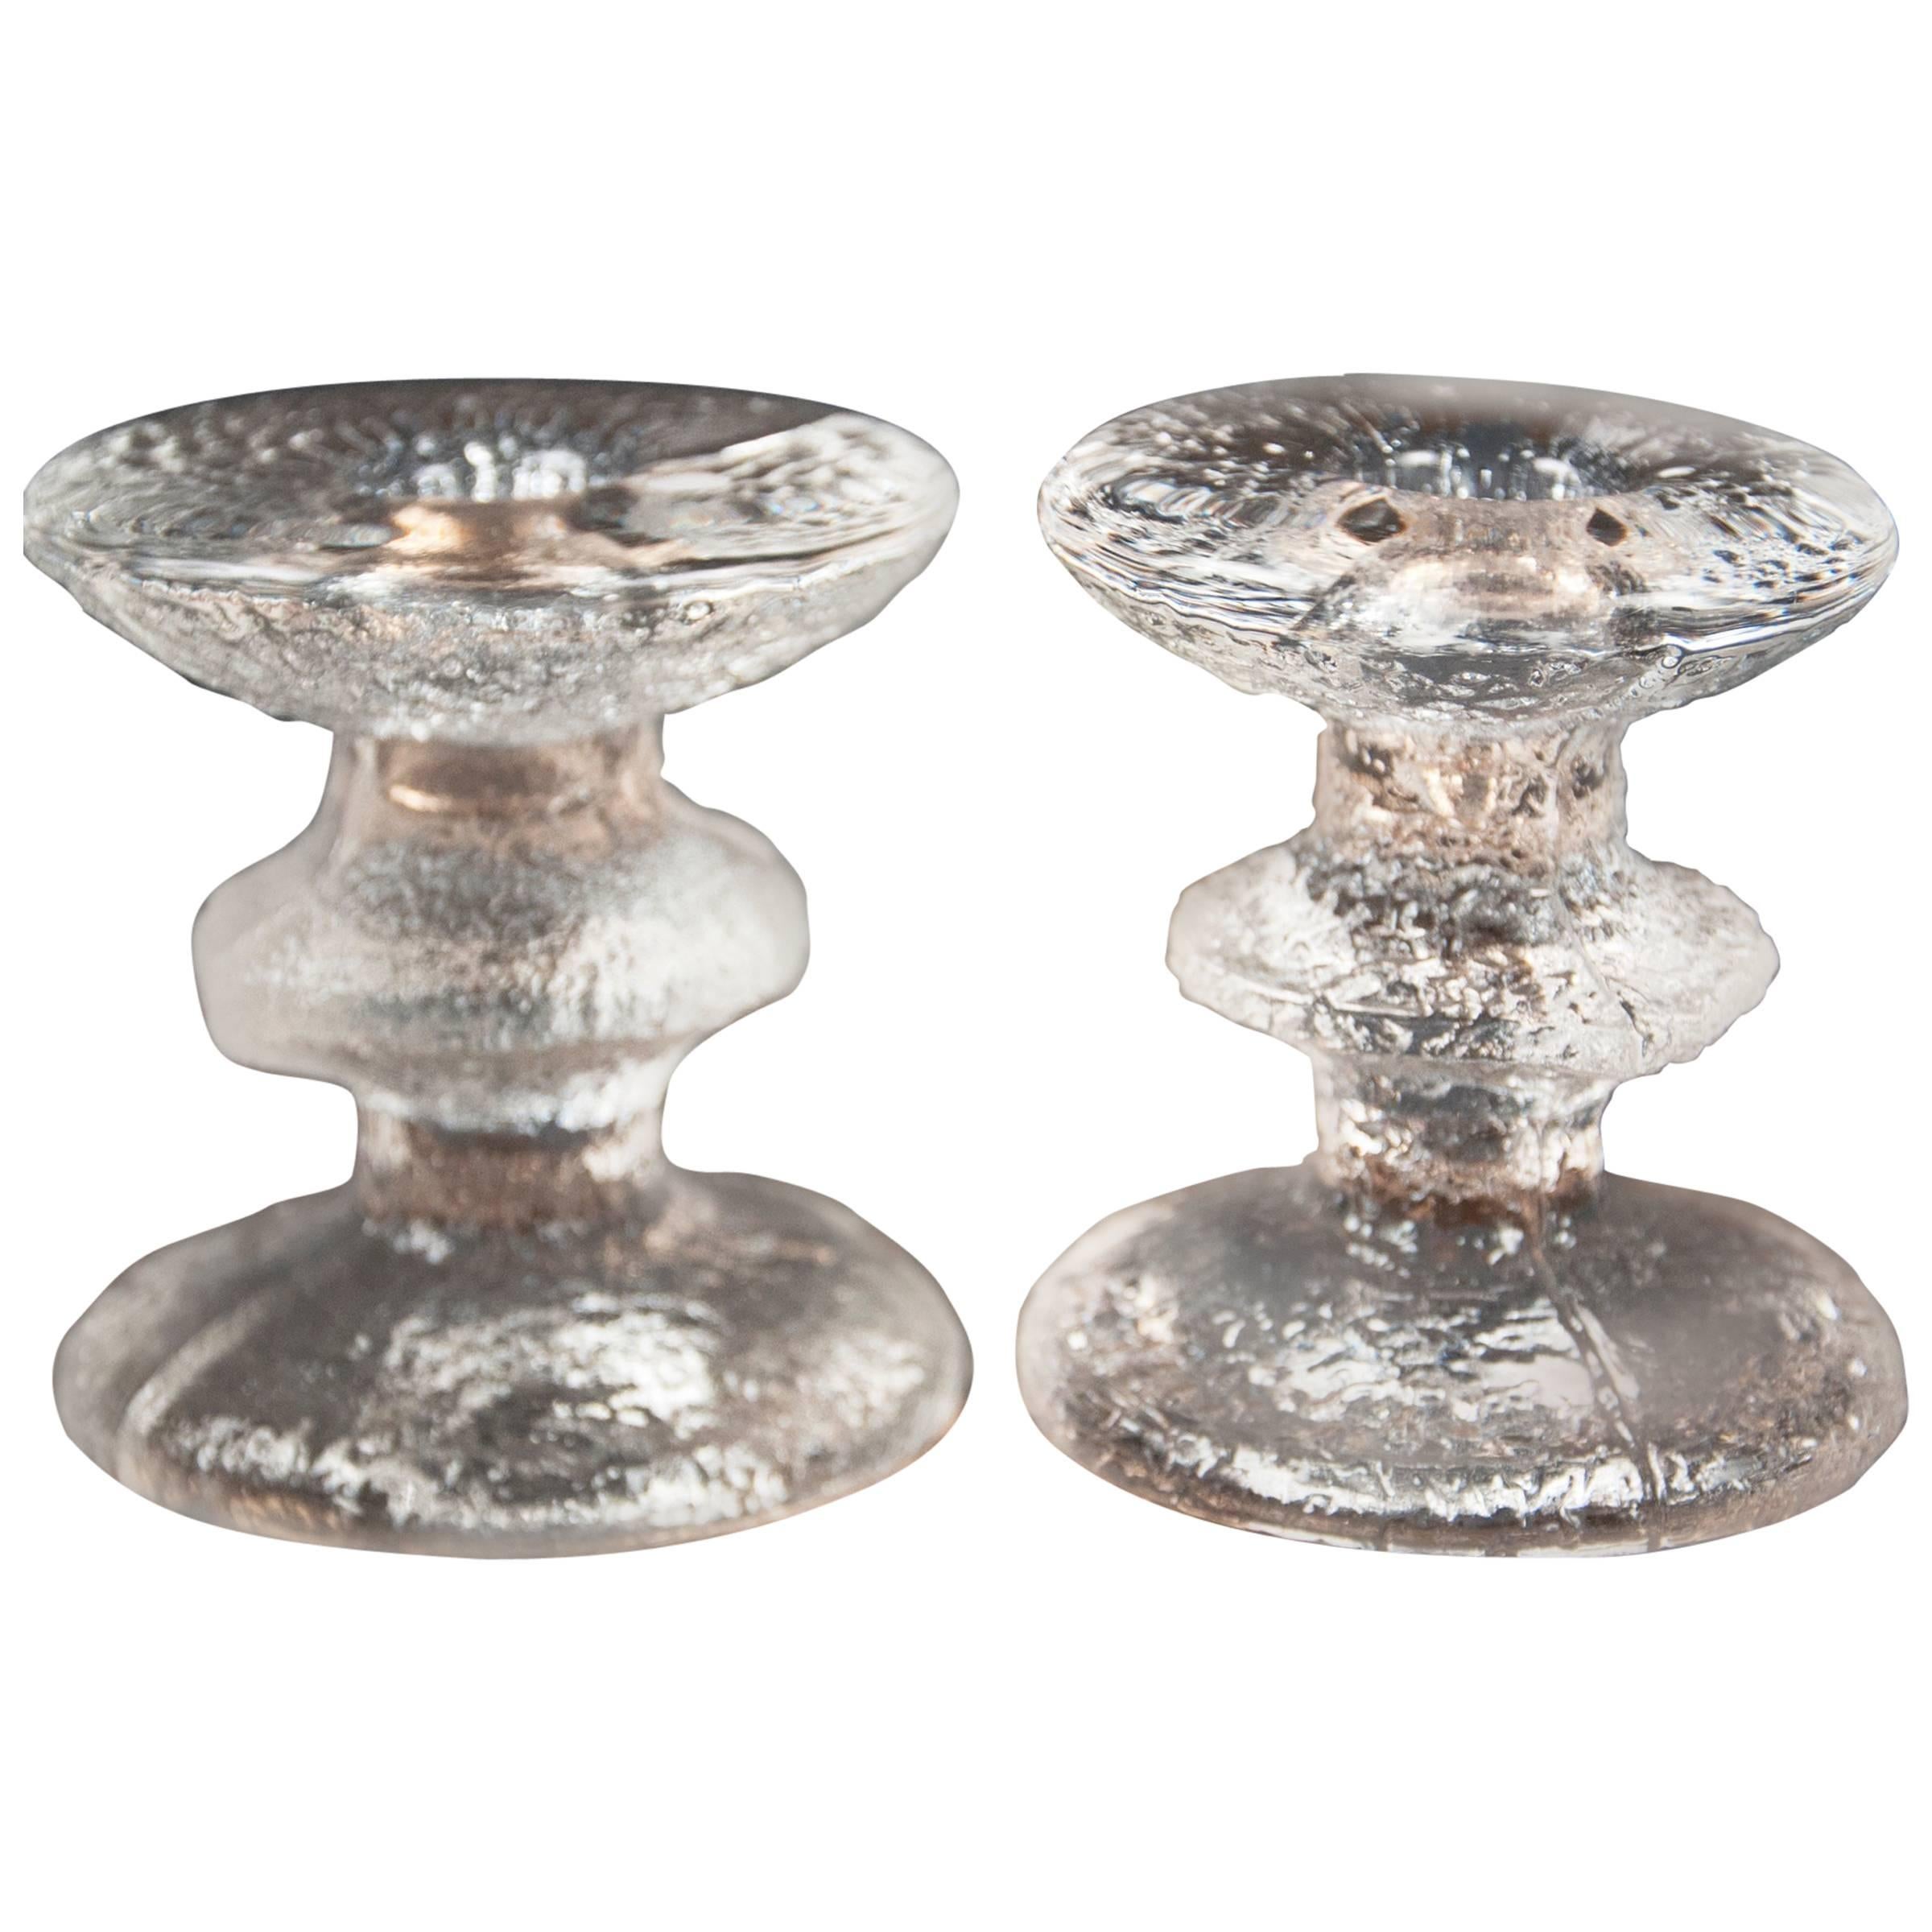  Pair of Candlesticks by Timo Sarpaneva for Iittala, Finland, 1980s